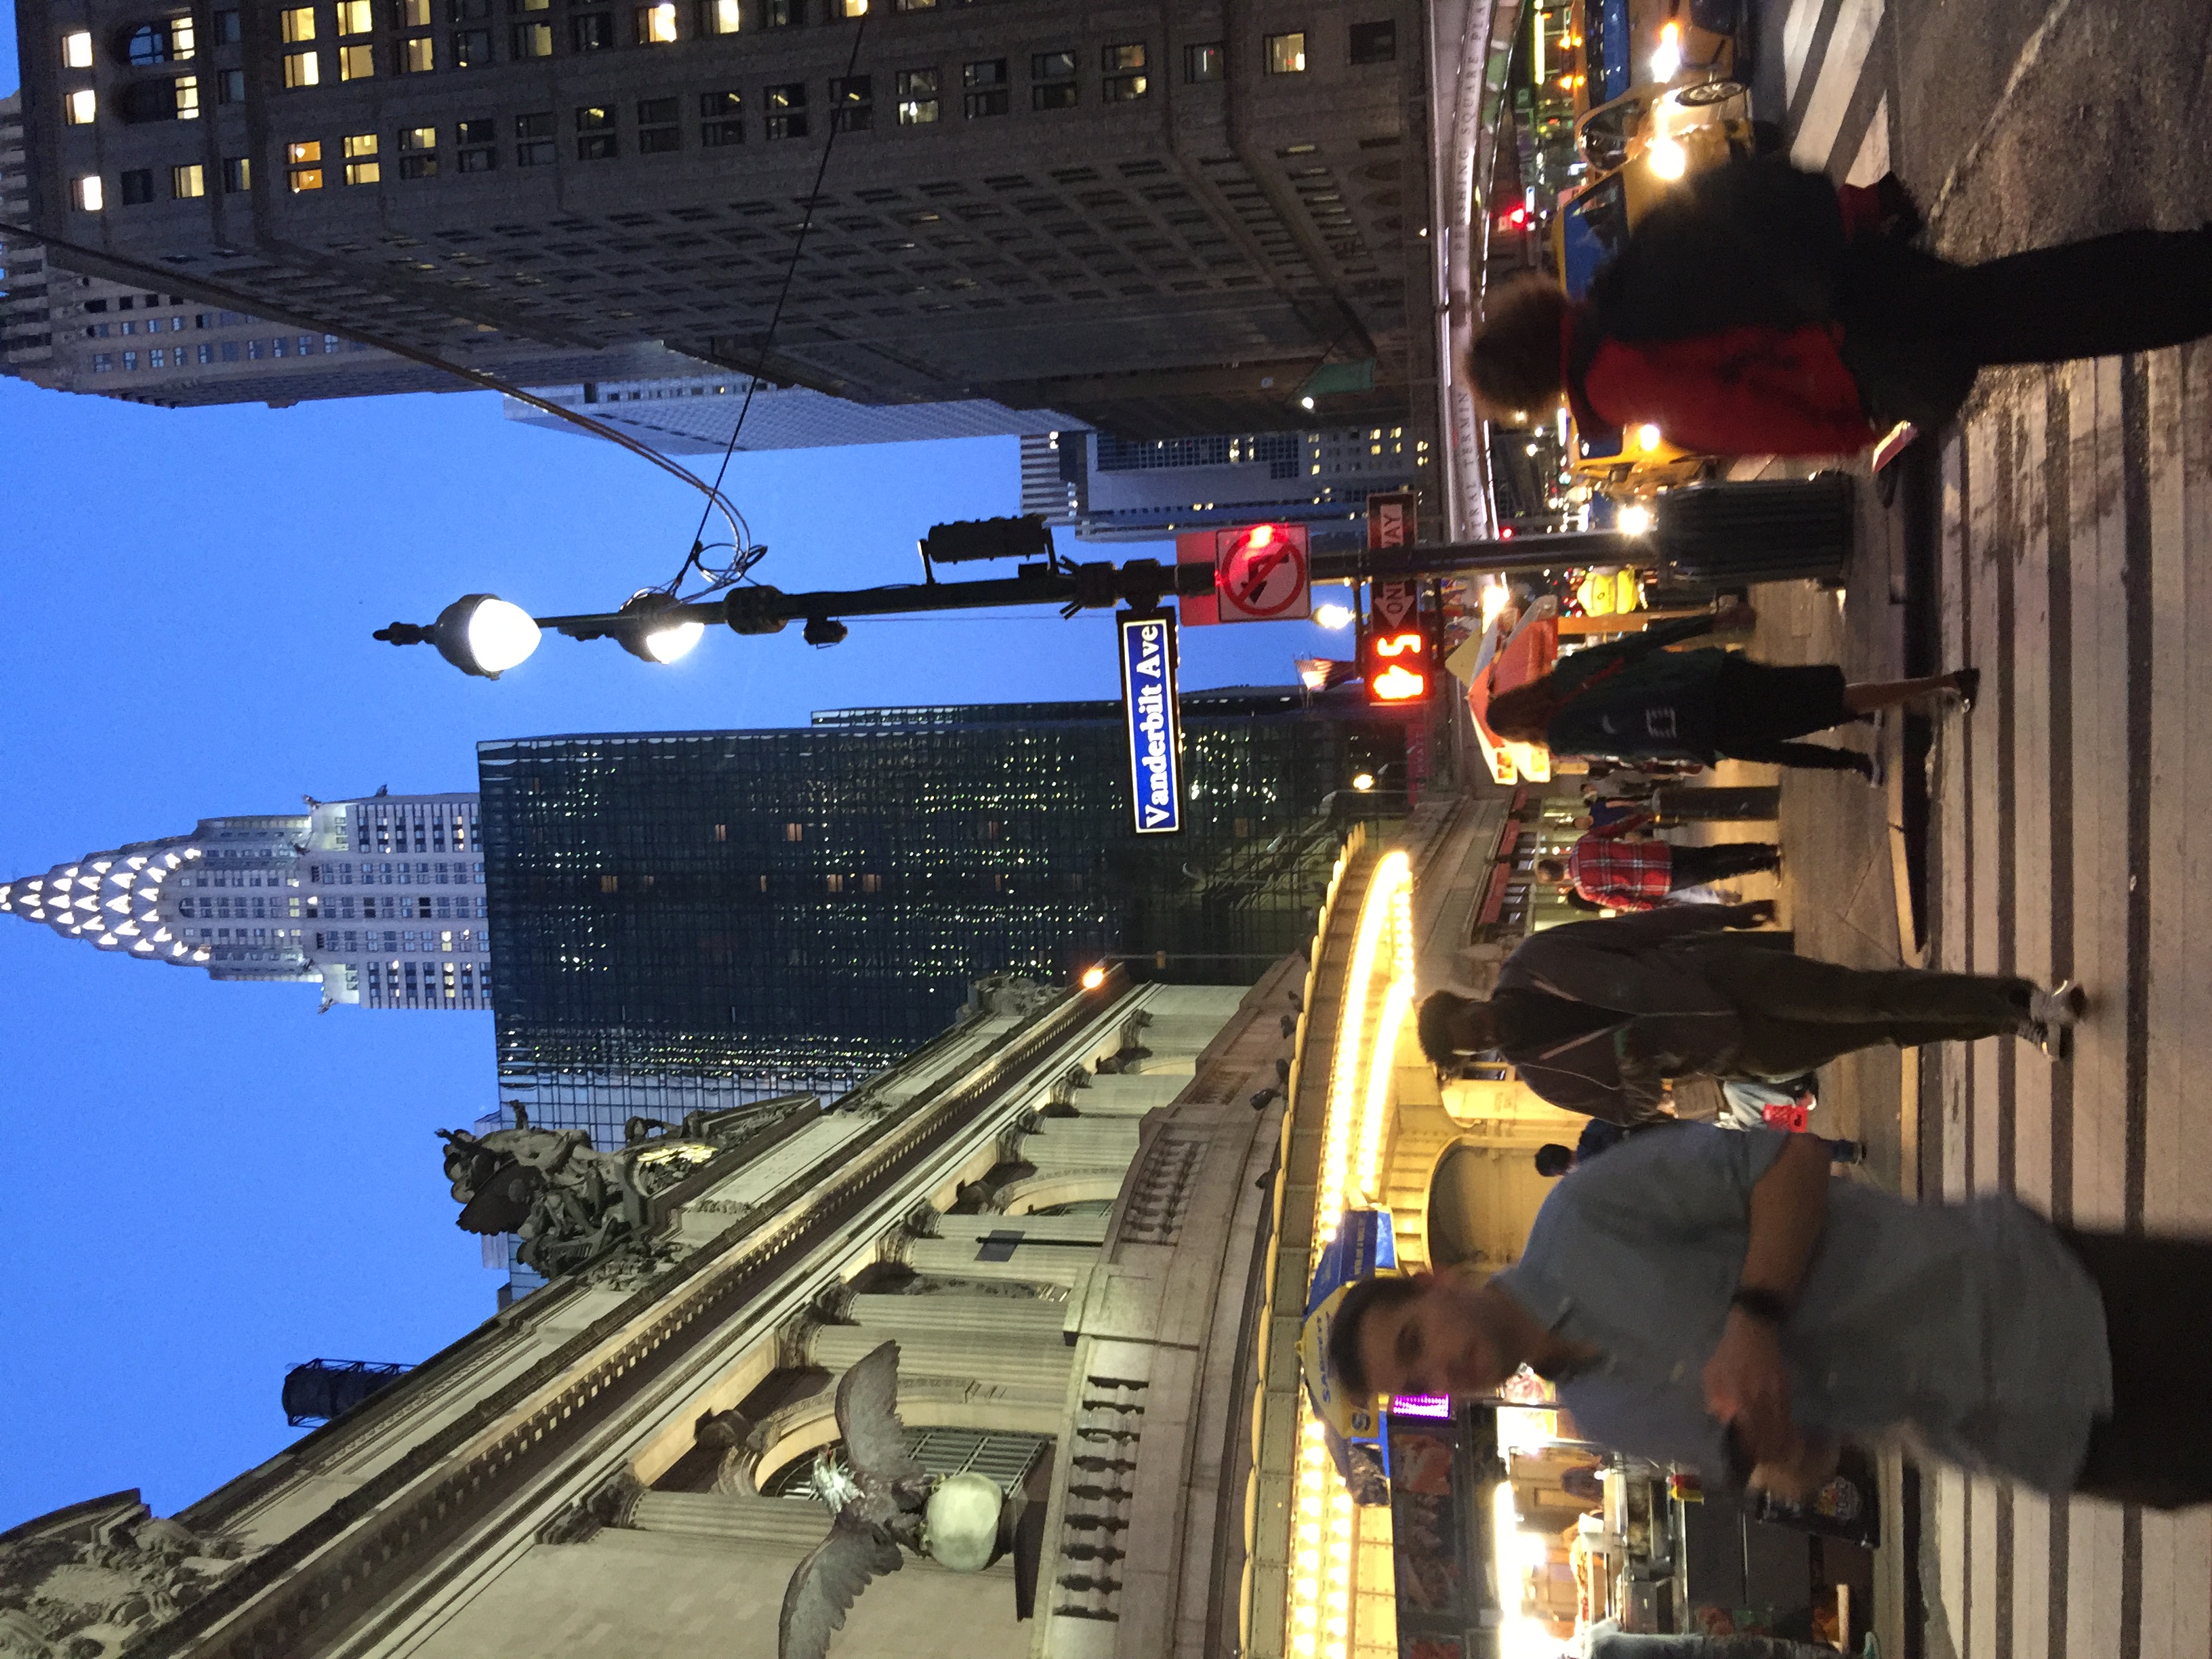 Grand Central Terminal at 42nd Street